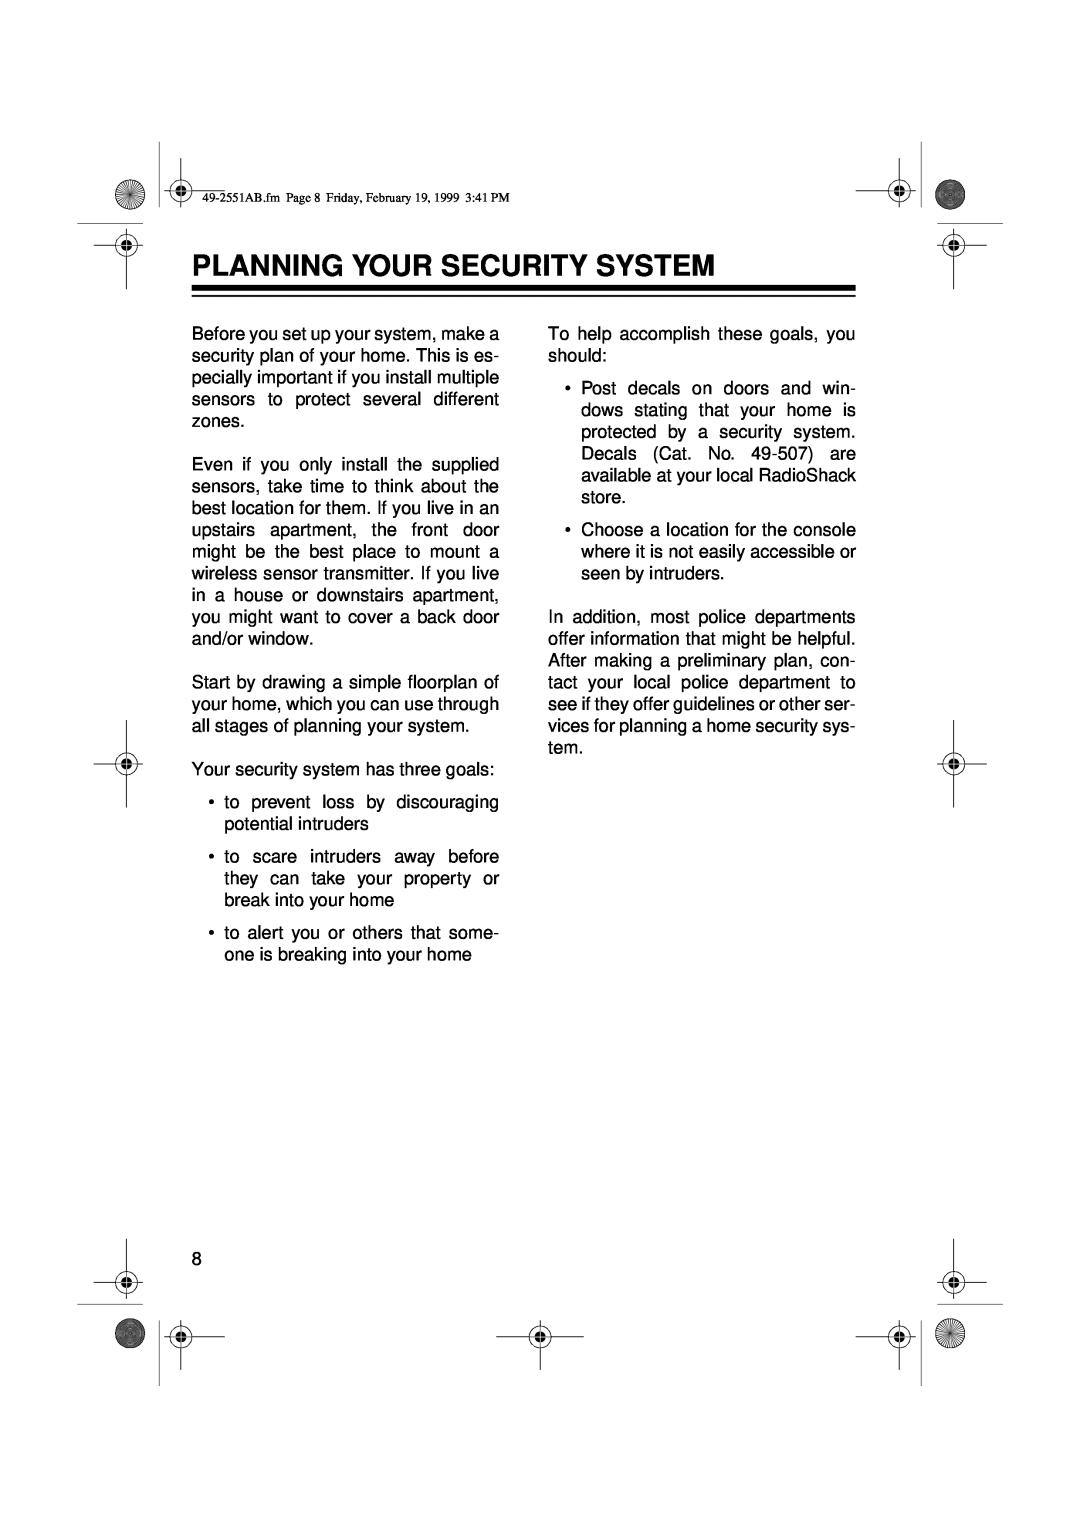 Radio Shack 49-2551A owner manual Planning Your Security System 